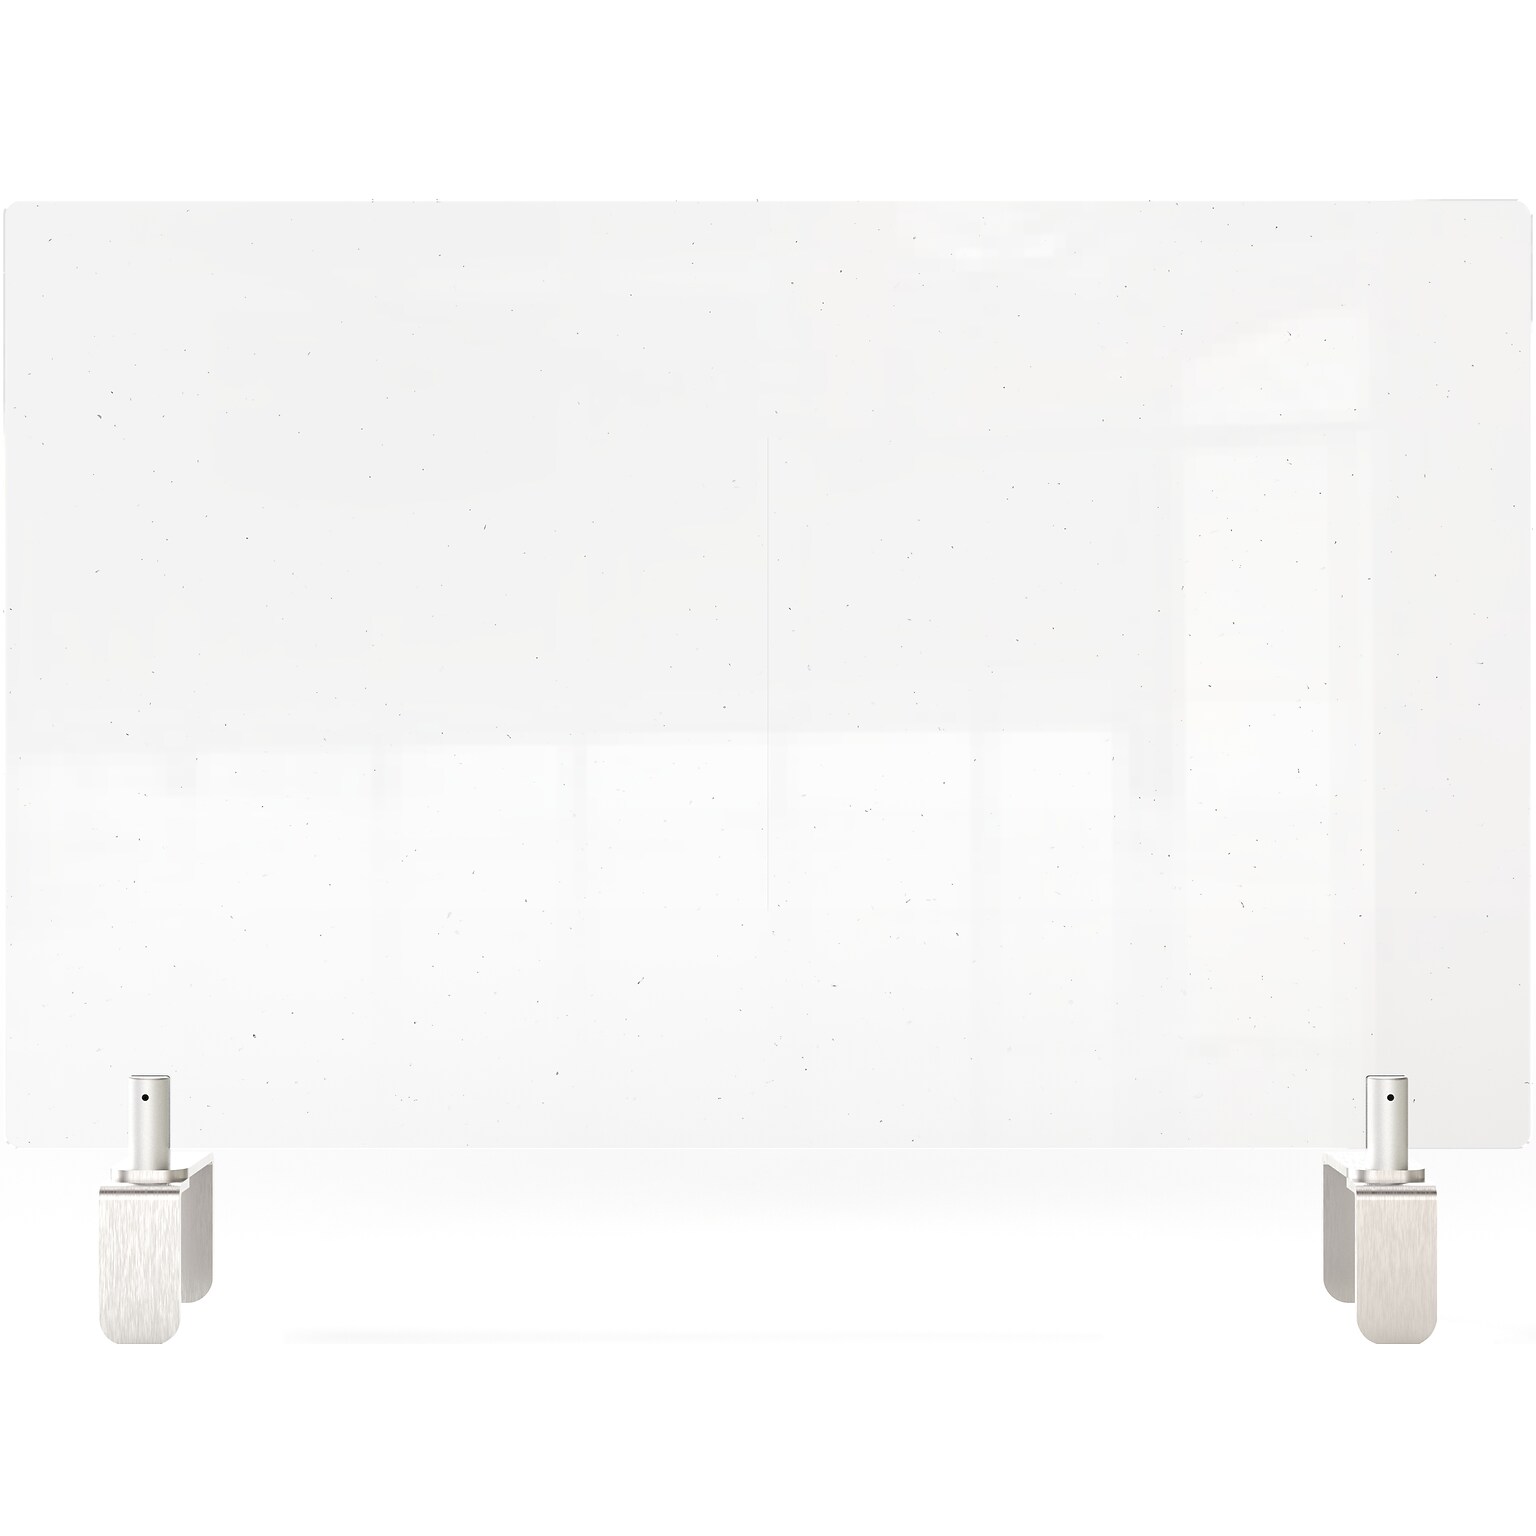 Ghent Clamp 18 x 29 Acrylic Non-Tackable Panel Extender, Clear (PEC1829-A)